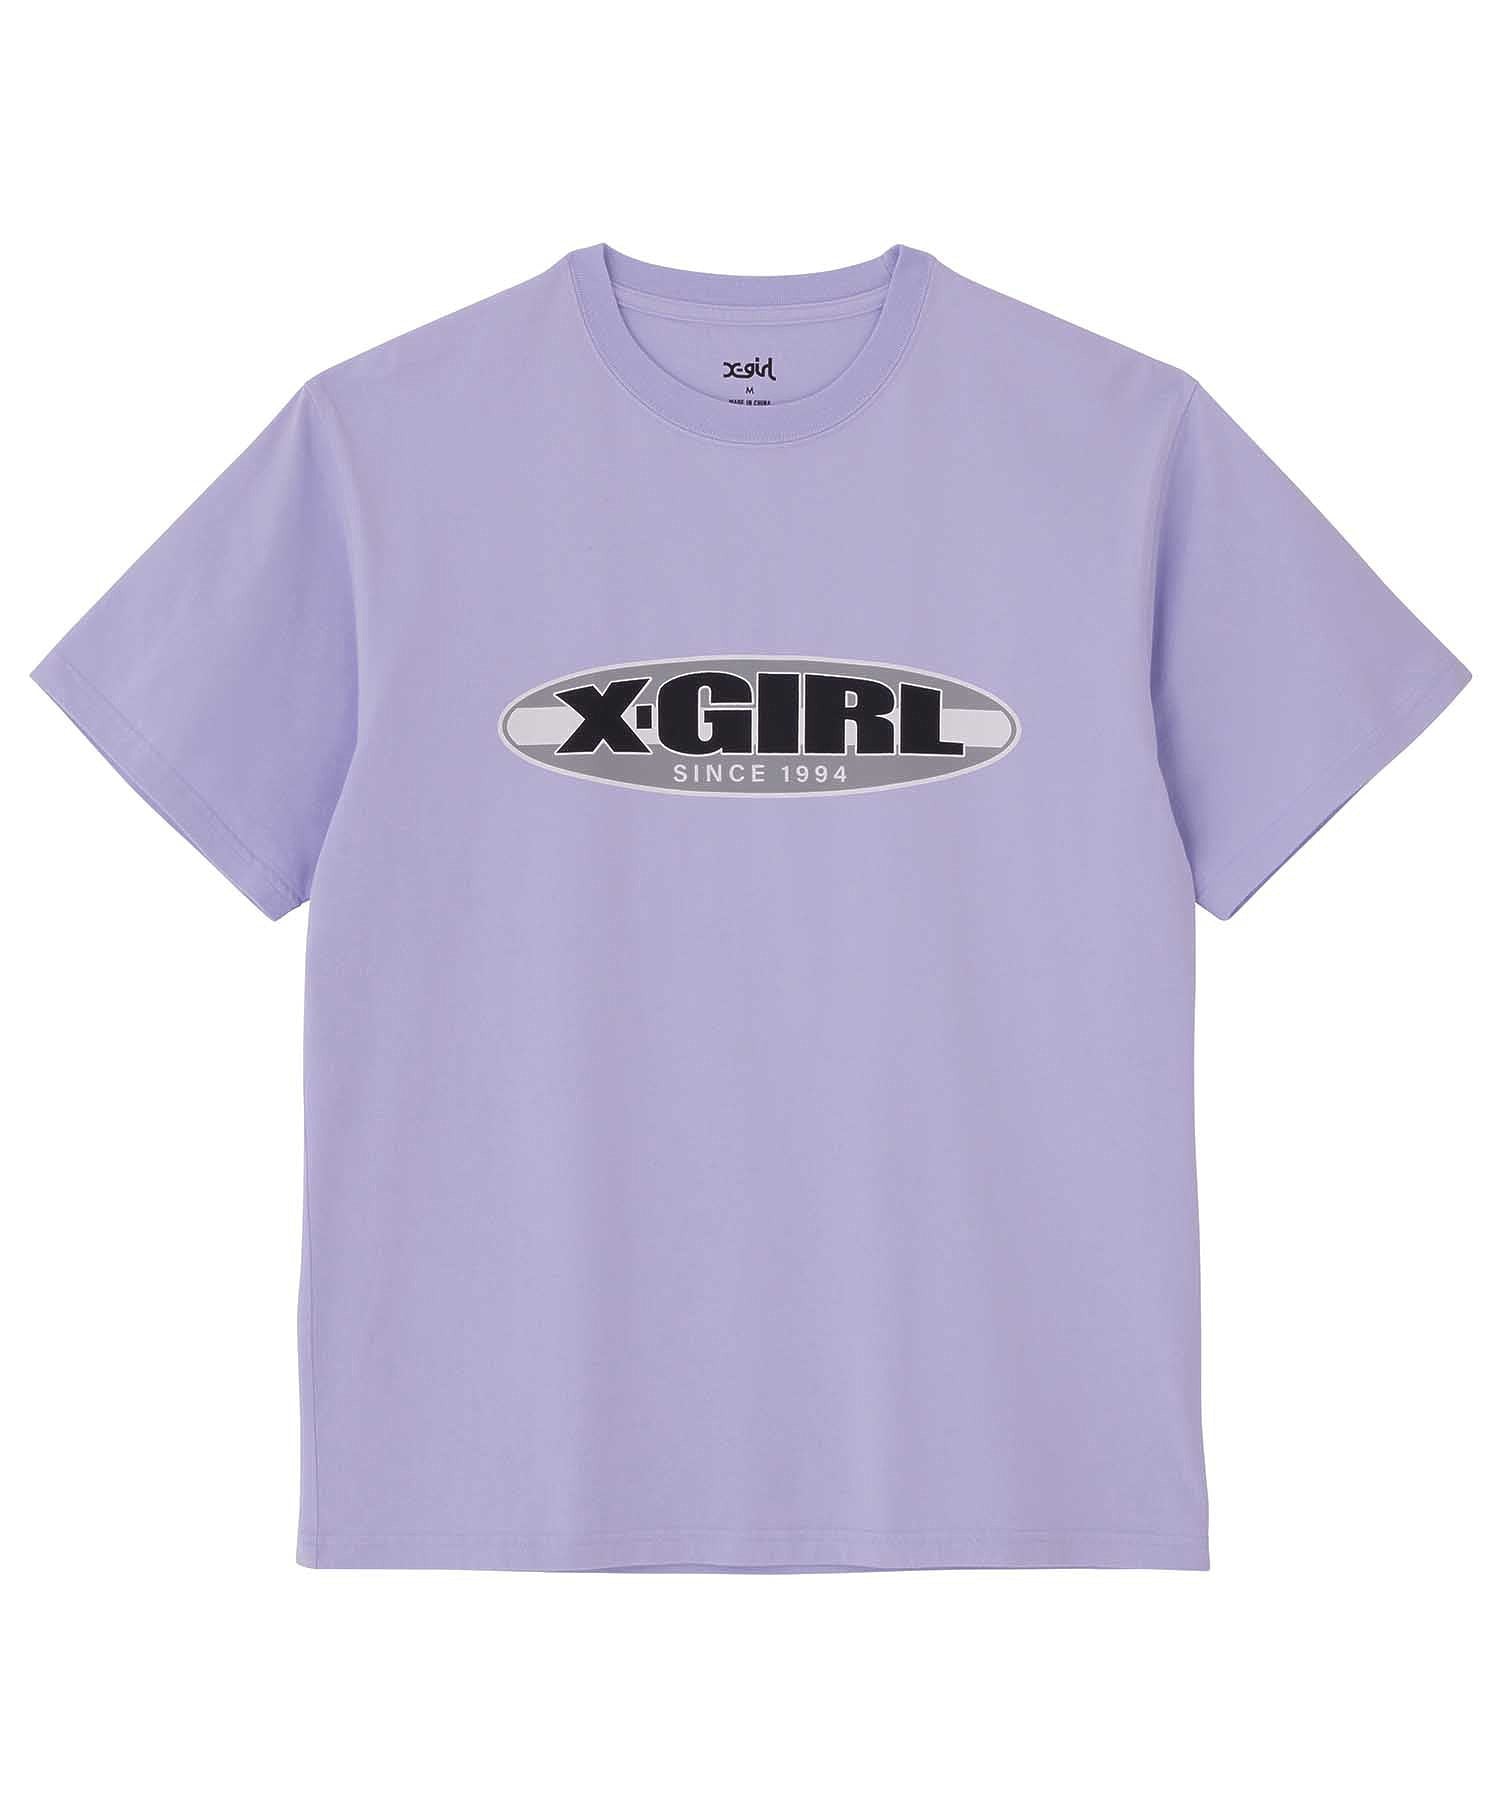 COLOR CONTRAST OVAL LOGO S/S TEE X-girl